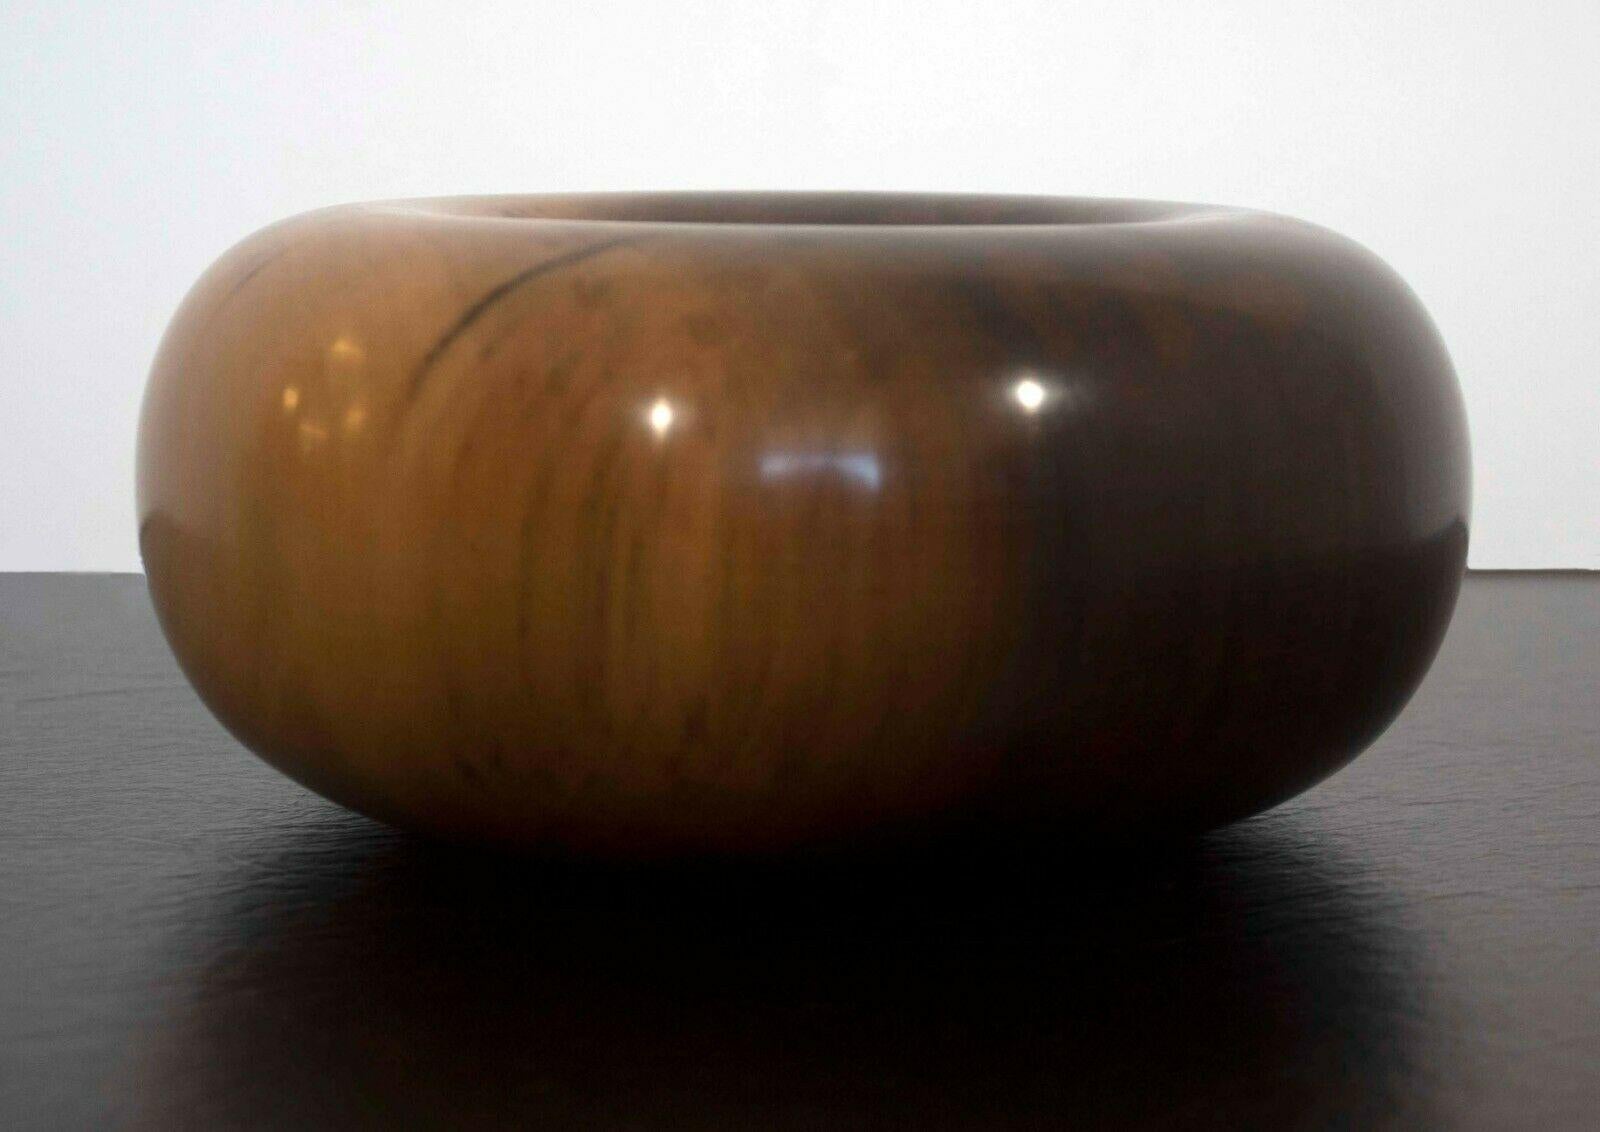 For your consideration is an outstanding turned donut wood sculpture signed on bottom Ed Moulthrop and with the following description: FIGURED TULIPWOOD LIRIODENDREN TULIPIFERA 216820. 

Trained as an architect, Moulthrop is a self-taught